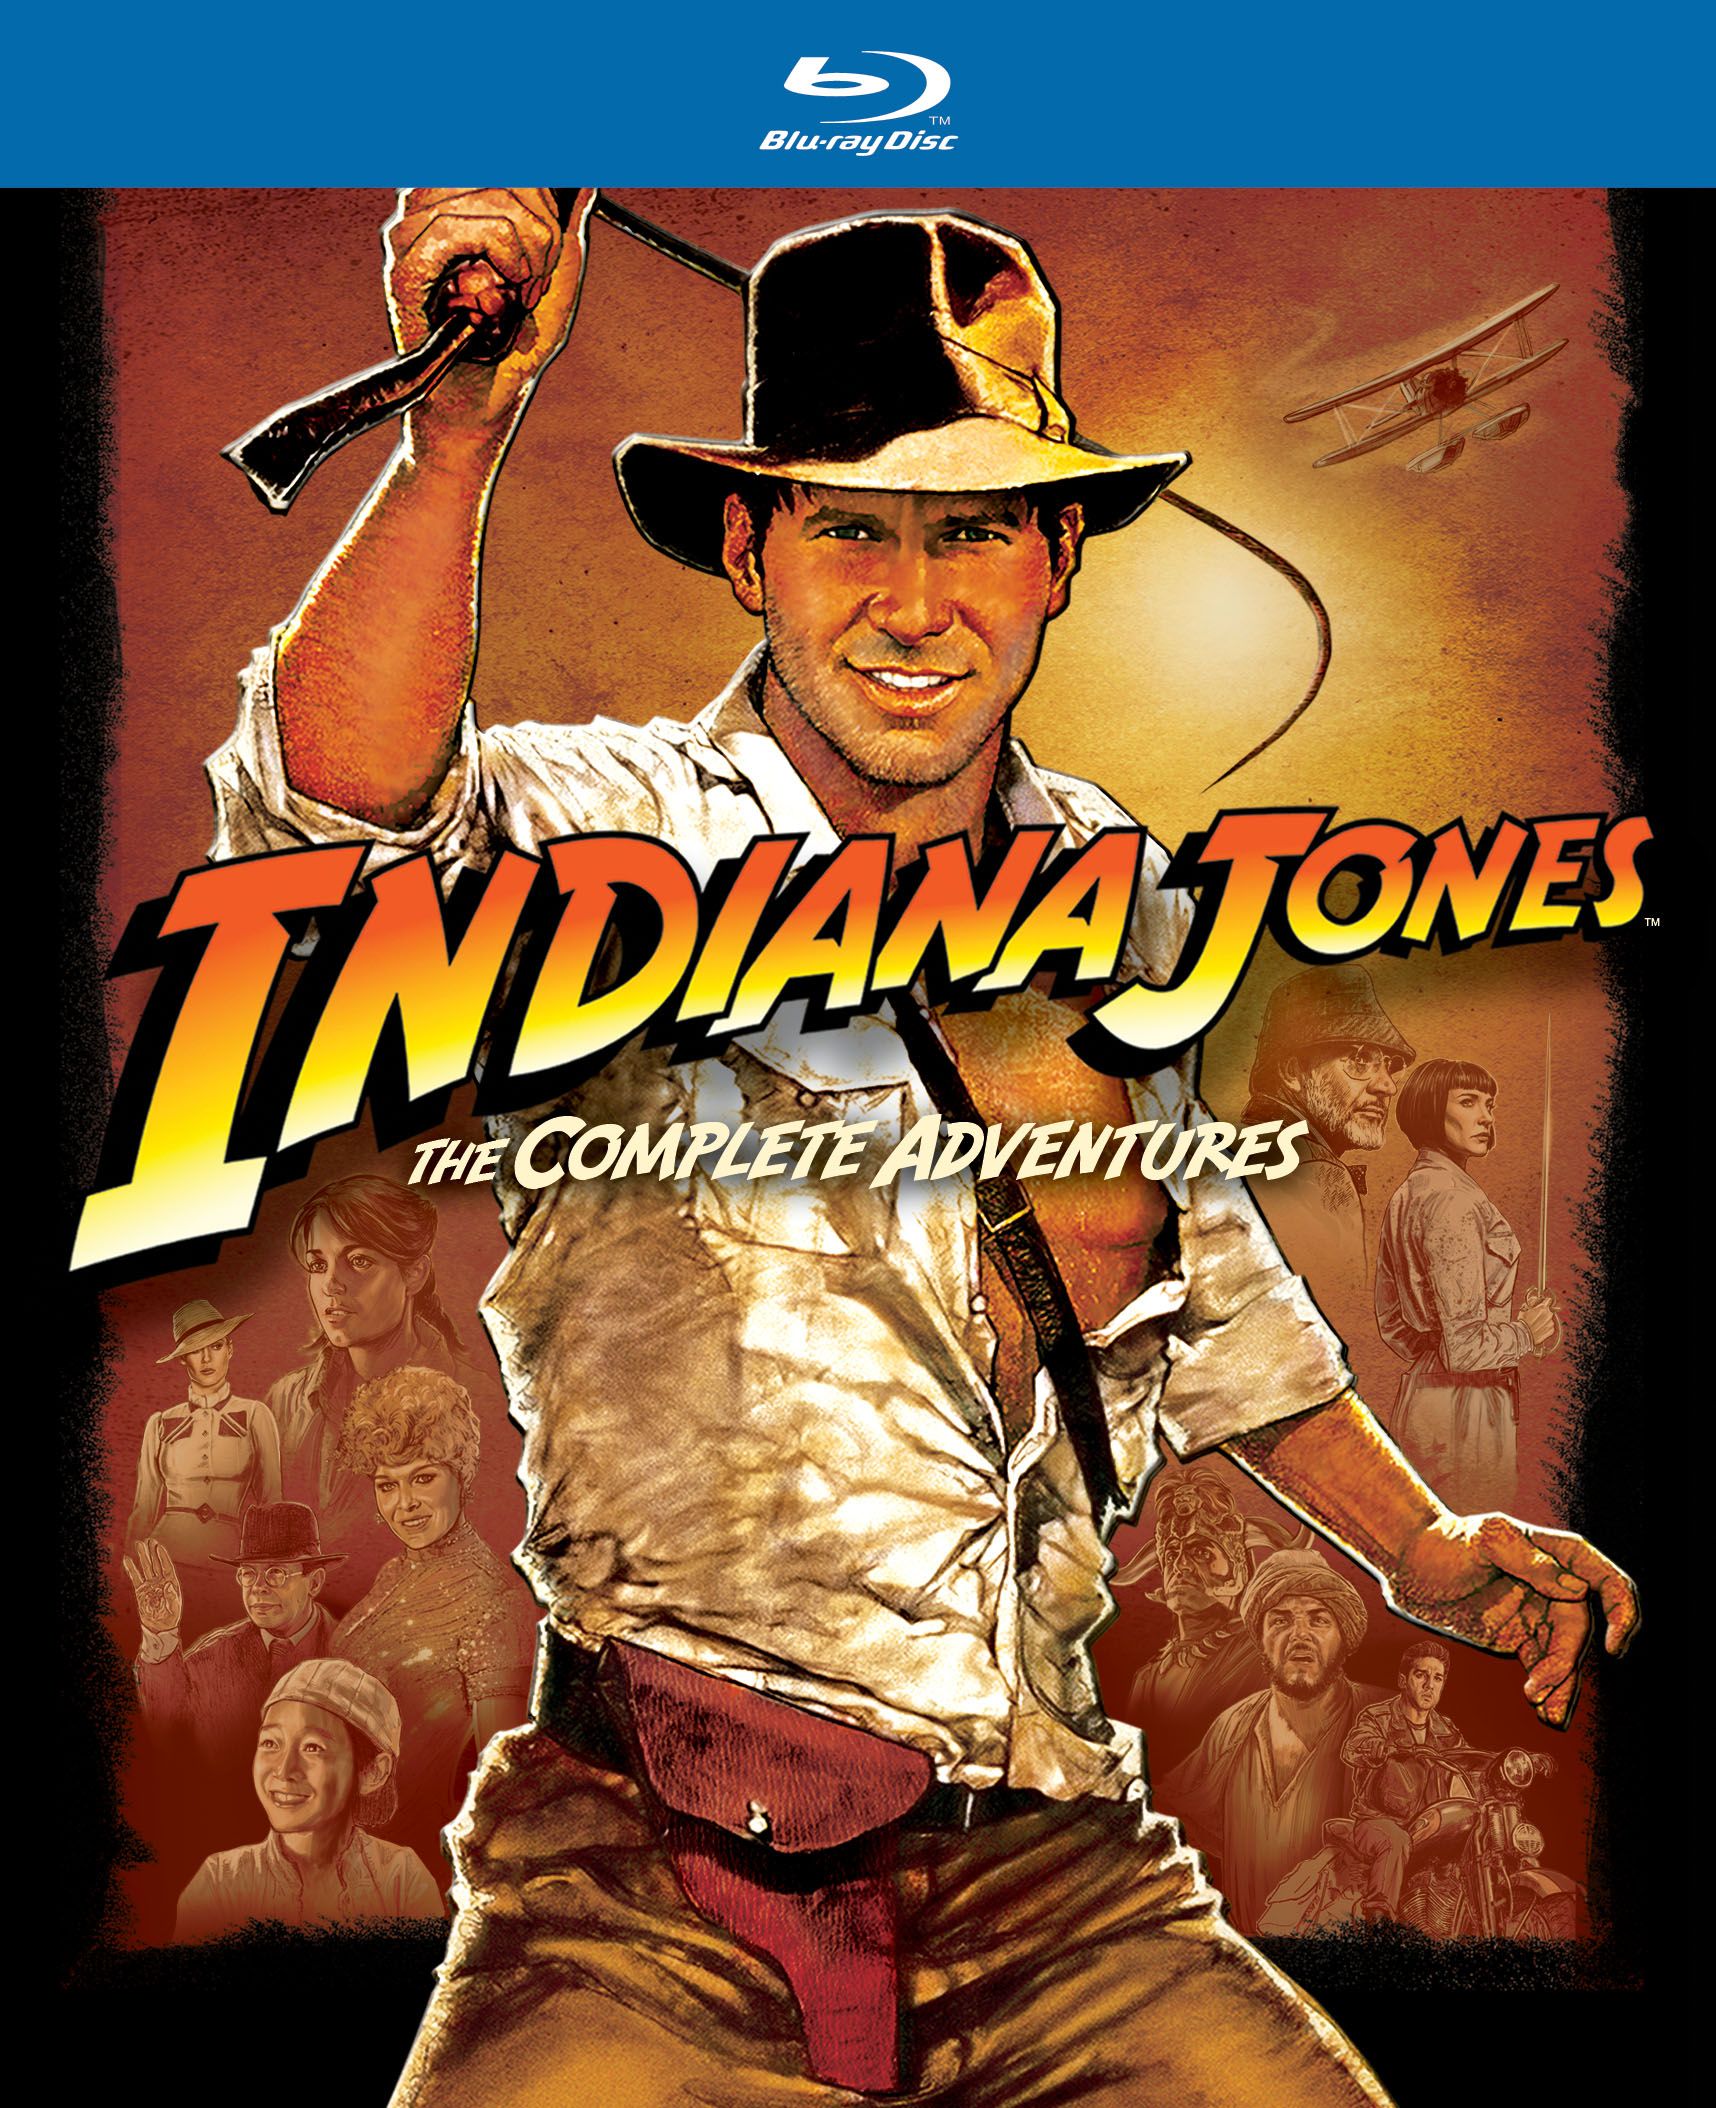 INDIANA JONES: THE COMPLETE ADVENTURES Blu-ray Review ...